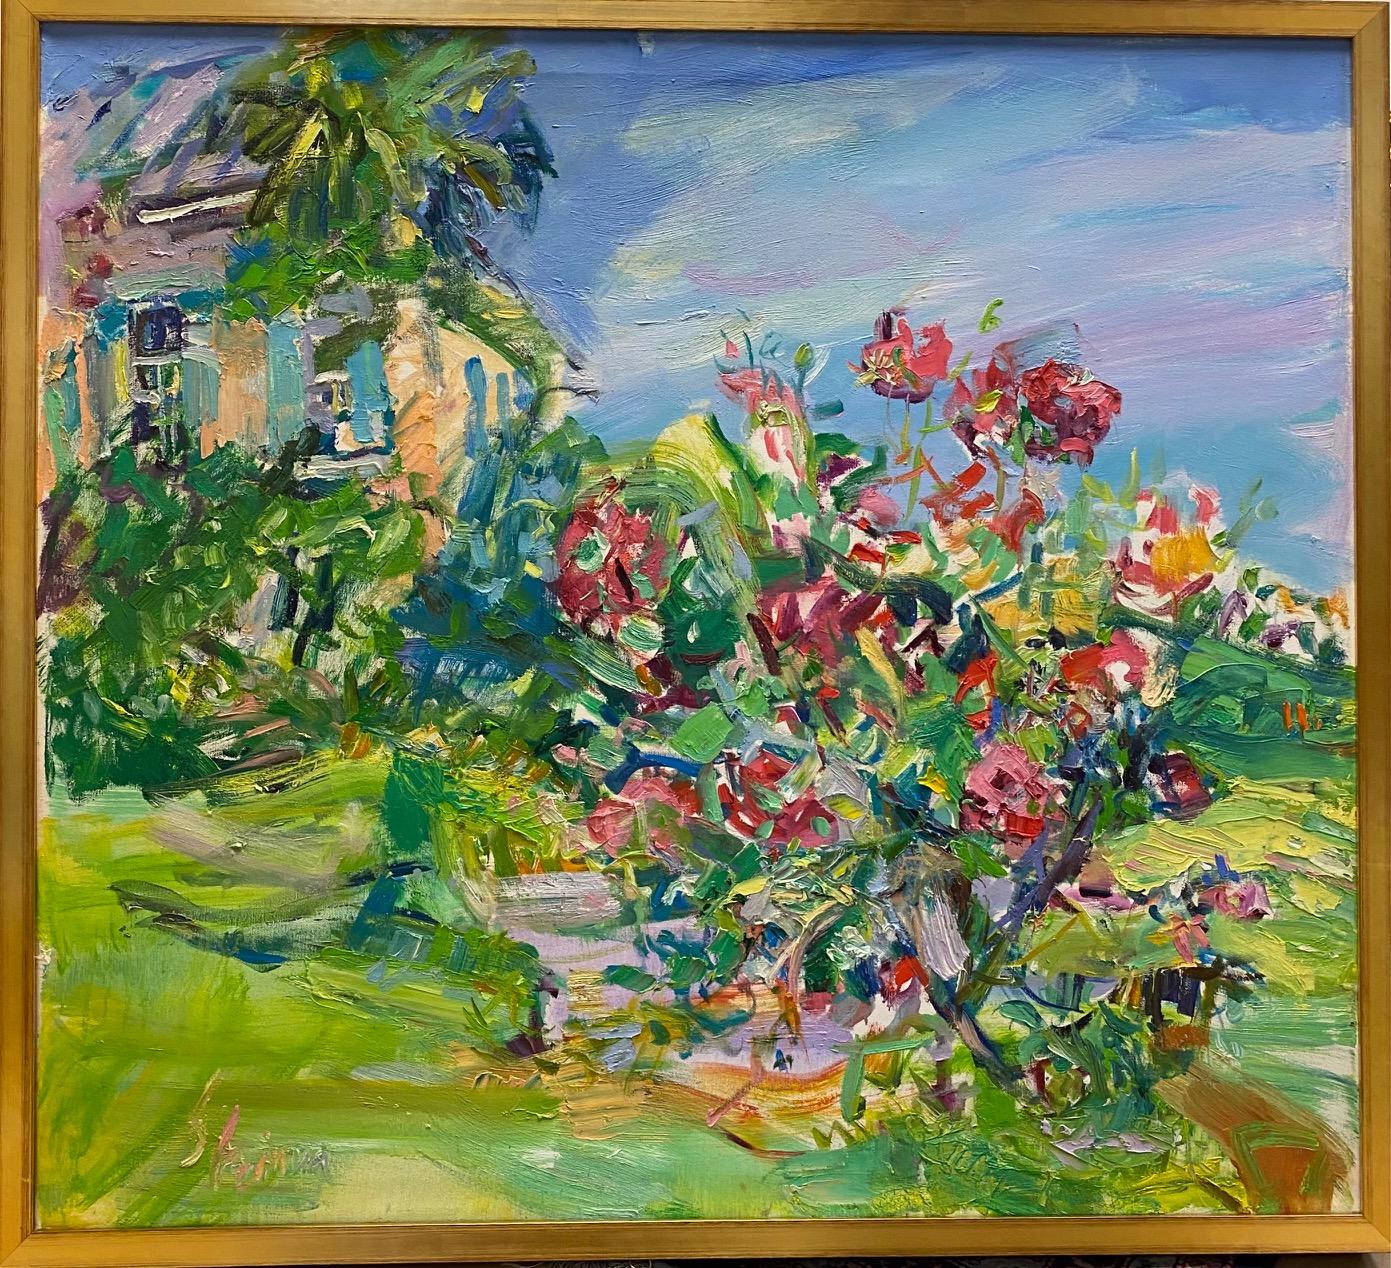 Sonia Grineva Landscape Painting - Italian Hideaway, original 36x40 abstract expressionist floral landscape